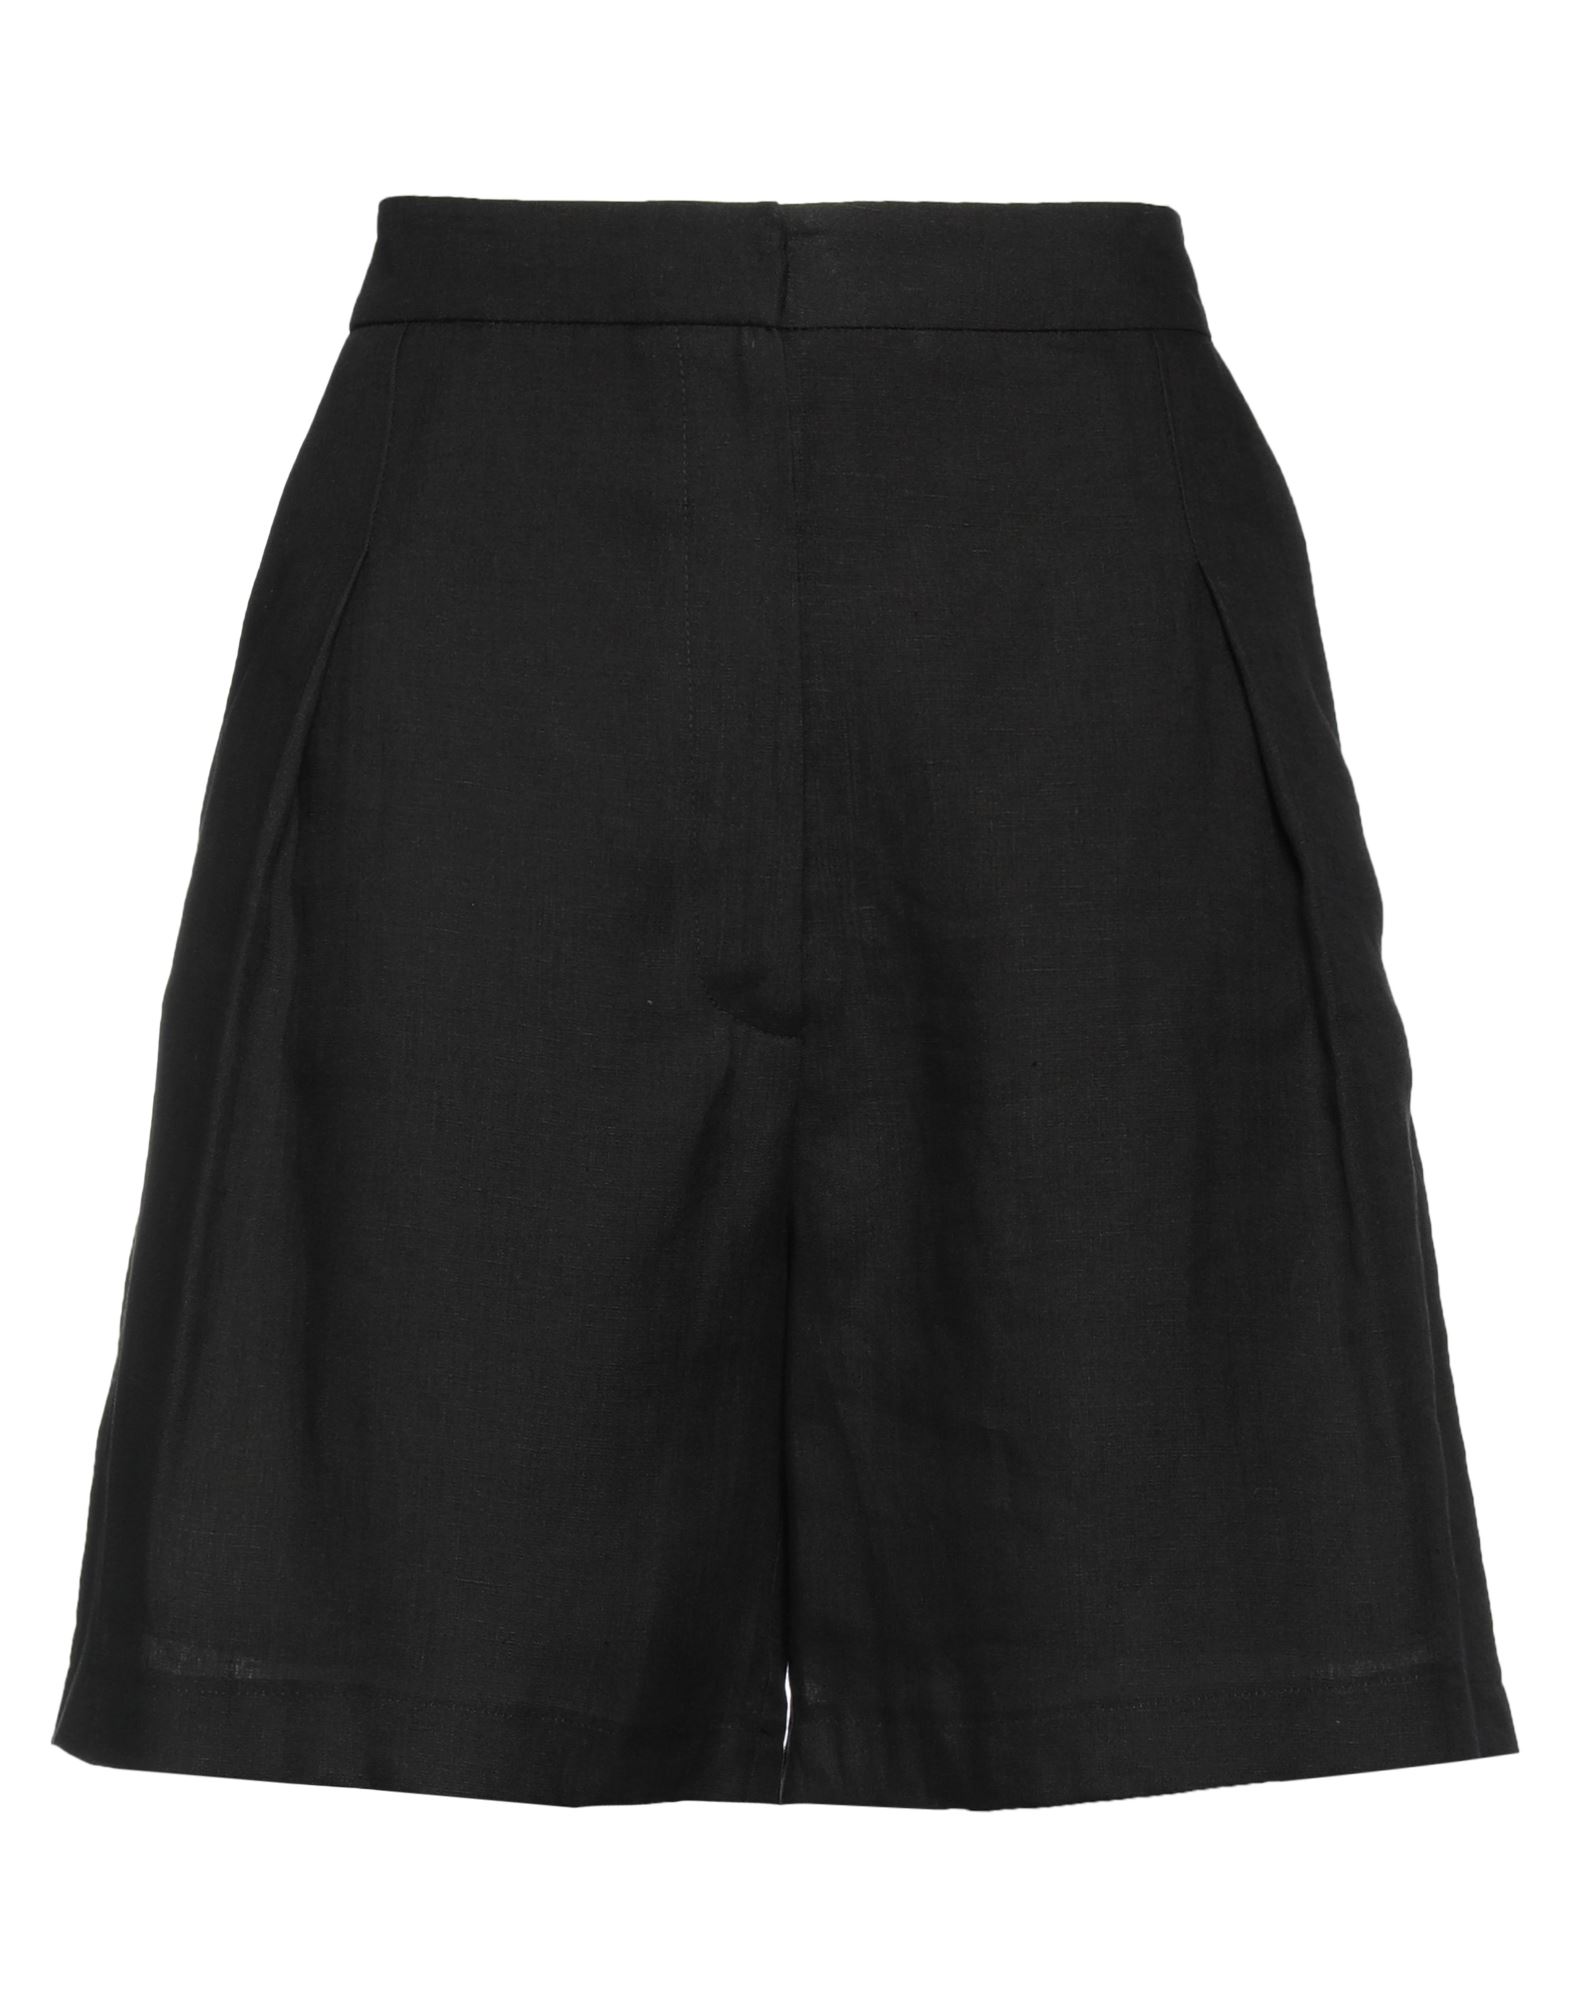 IN THE MOOD FOR LOVE Shorts & Bermudashorts Damen Schwarz von IN THE MOOD FOR LOVE